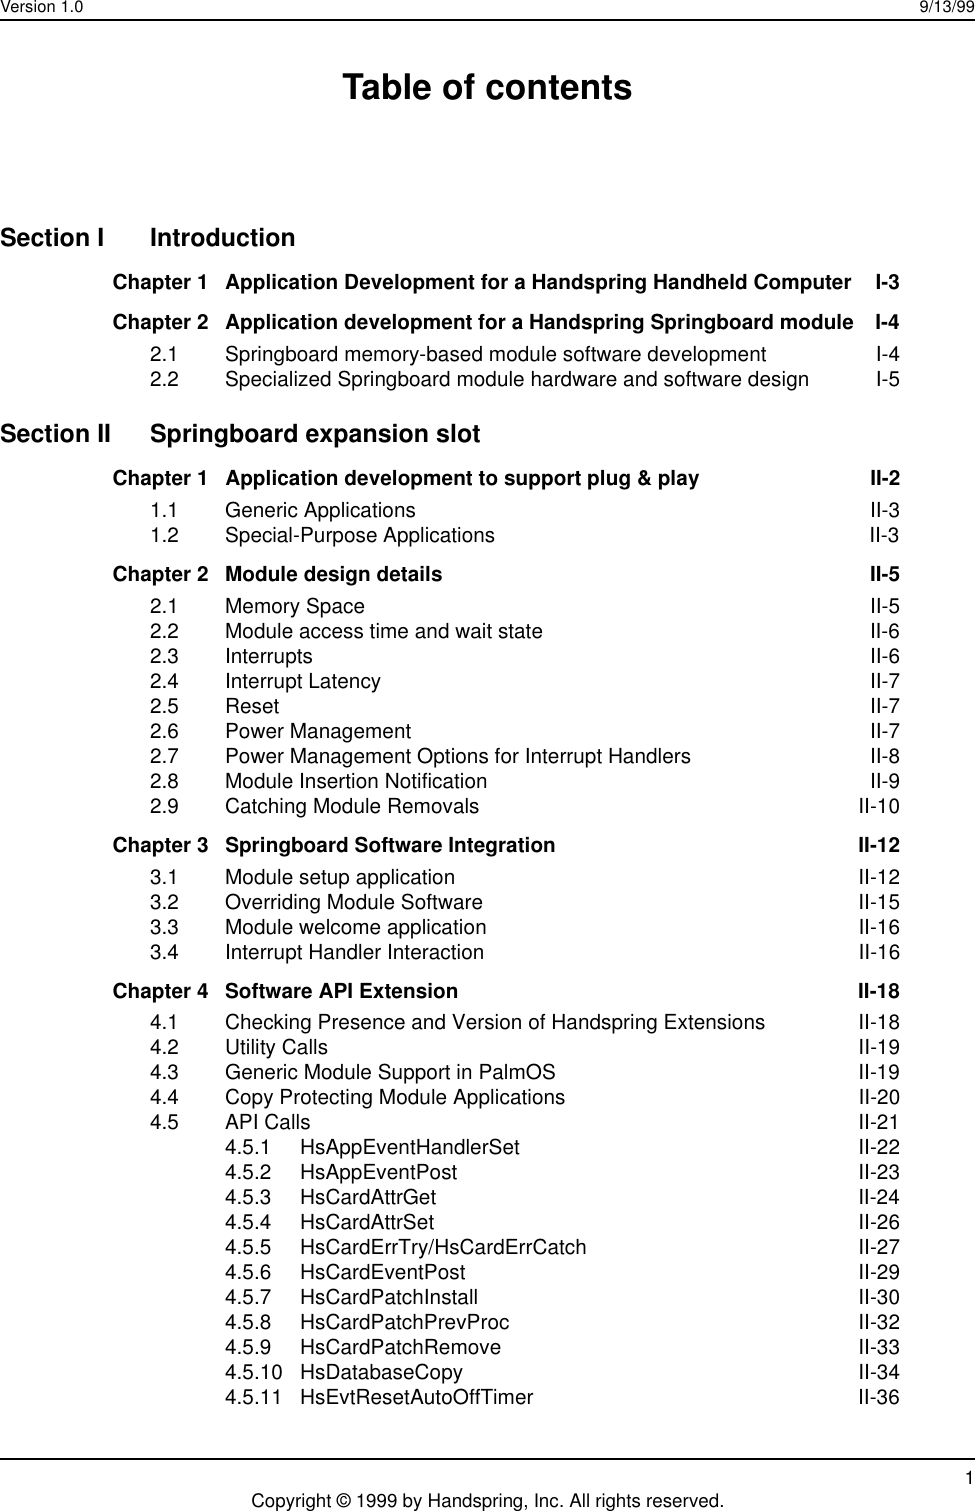 Version 1.0 9/13/991Copyright © 1999 by Handspring, Inc. All rights reserved.Table of contentsSection I IntroductionChapter 1 Application Development for a Handspring Handheld Computer  I-3Chapter 2 Application development for a Handspring Springboard module  I-42.1 Springboard memory-based module software development  I-42.2 Specialized Springboard module hardware and software design I-5Section II Springboard expansion slotChapter 1 Application development to support plug &amp; play  II-21.1 Generic Applications II-31.2 Special-Purpose Applications  II-3Chapter 2 Module design details  II-52.1 Memory Space  II-52.2 Module access time and wait state  II-62.3 Interrupts II-62.4 Interrupt Latency II-72.5 Reset II-72.6 Power Management II-72.7 Power Management Options for Interrupt Handlers  II-82.8 Module Insertion Notification  II-92.9 Catching Module Removals  II-10Chapter 3 Springboard Software Integration  II-123.1 Module setup application  II-123.2 Overriding Module Software  II-153.3 Module welcome application  II-163.4 Interrupt Handler Interaction  II-16Chapter 4 Software API Extension  II-184.1 Checking Presence and Version of Handspring Extensions  II-184.2 Utility Calls  II-194.3 Generic Module Support in PalmOS  II-194.4 Copy Protecting Module Applications  II-204.5 API Calls  II-214.5.1 HsAppEventHandlerSet II-224.5.2 HsAppEventPost II-234.5.3 HsCardAttrGet II-244.5.4 HsCardAttrSet II-264.5.5 HsCardErrTry/HsCardErrCatch II-274.5.6 HsCardEventPost II-294.5.7 HsCardPatchInstall II-304.5.8 HsCardPatchPrevProc II-324.5.9 HsCardPatchRemove II-334.5.10 HsDatabaseCopy II-344.5.11 HsEvtResetAutoOffTimer II-36